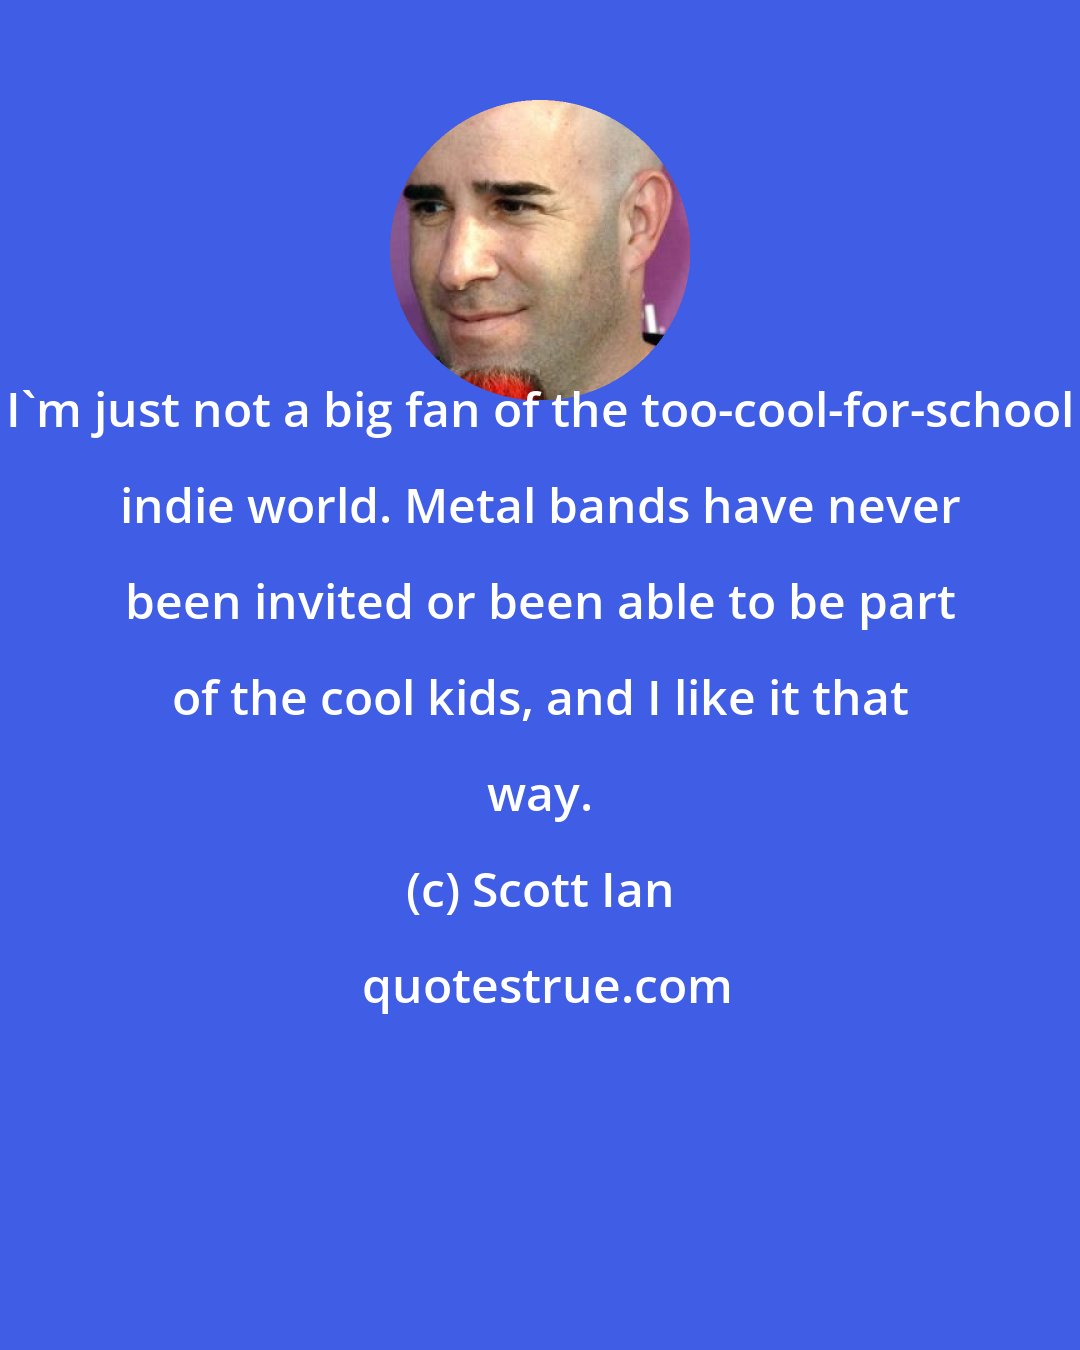 Scott Ian: I'm just not a big fan of the too-cool-for-school indie world. Metal bands have never been invited or been able to be part of the cool kids, and I like it that way.